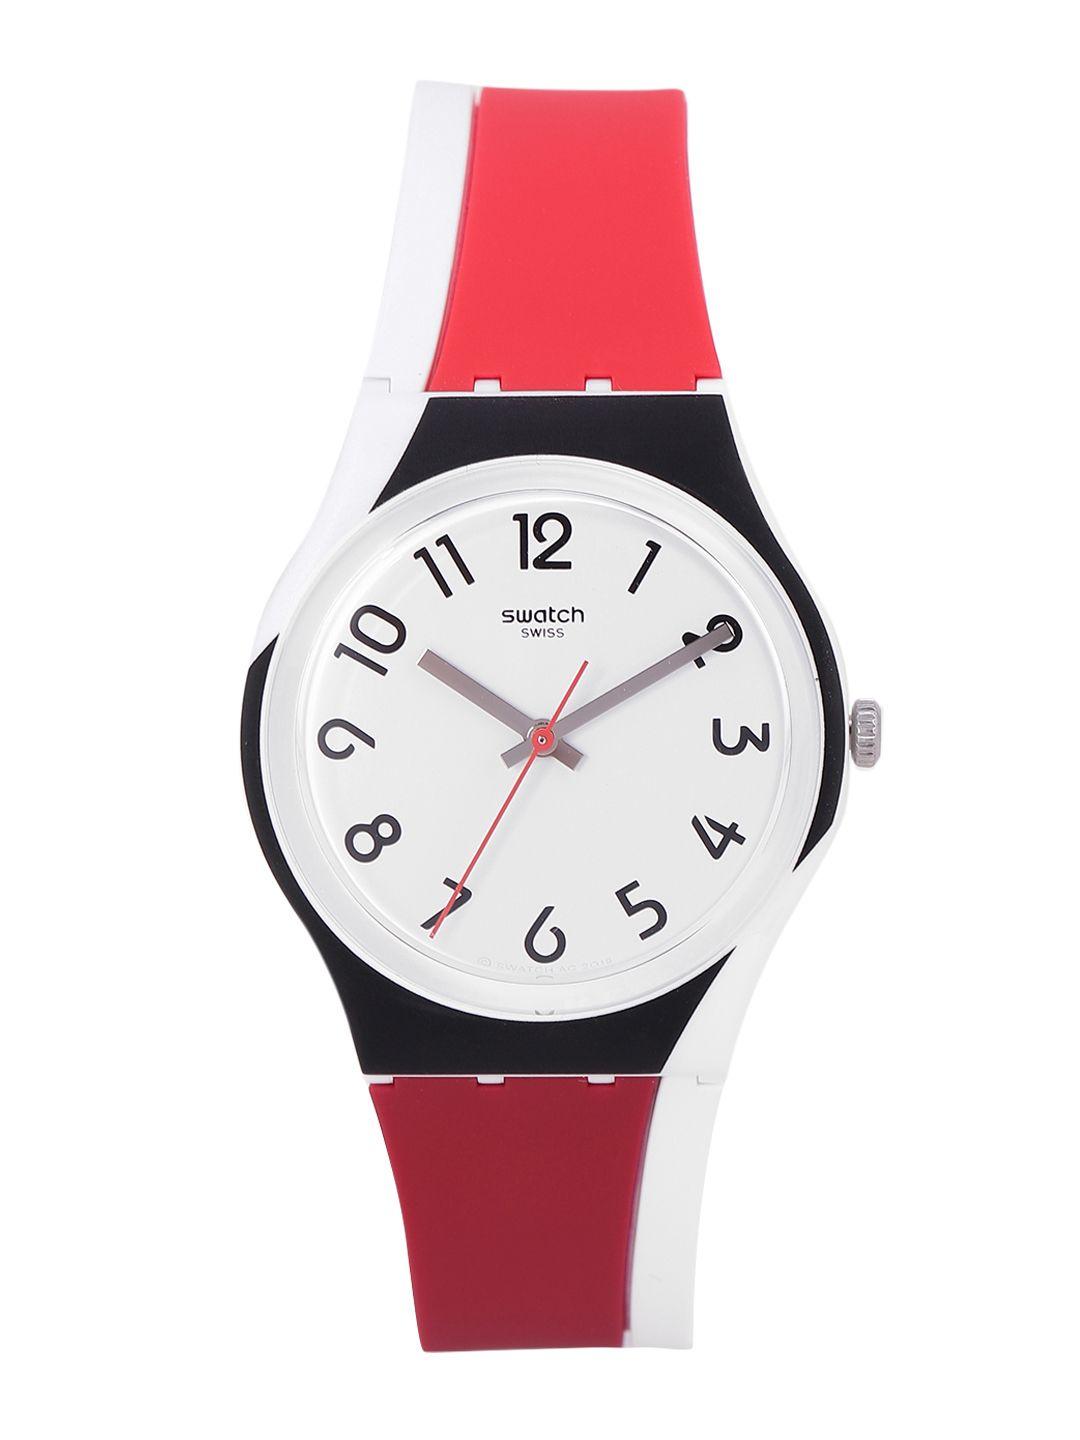 swatch bauswatch unisex white water resistant analogue watch gw208